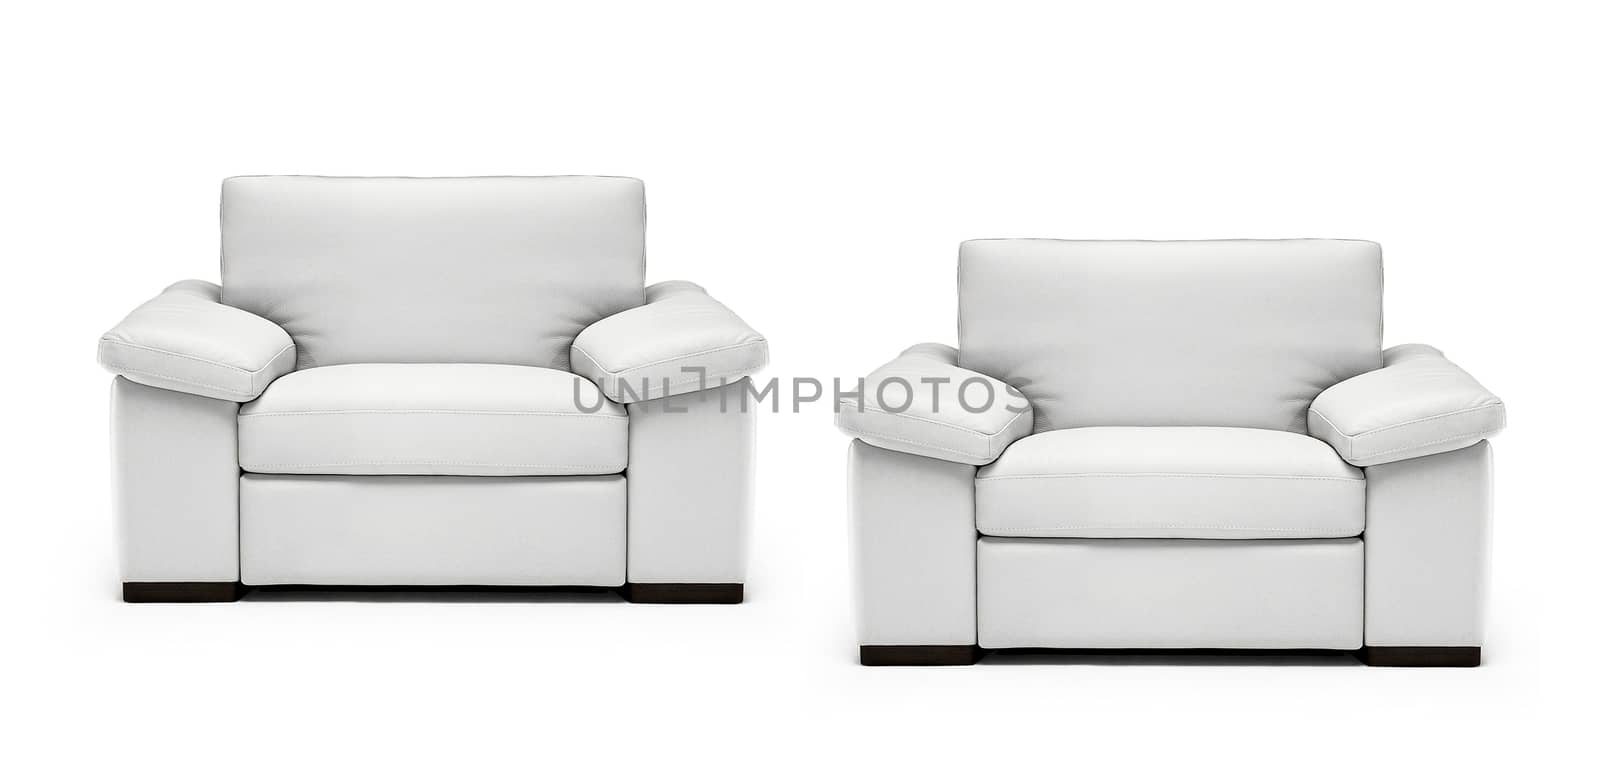 Image of a modern leather armchairs by ozaiachin